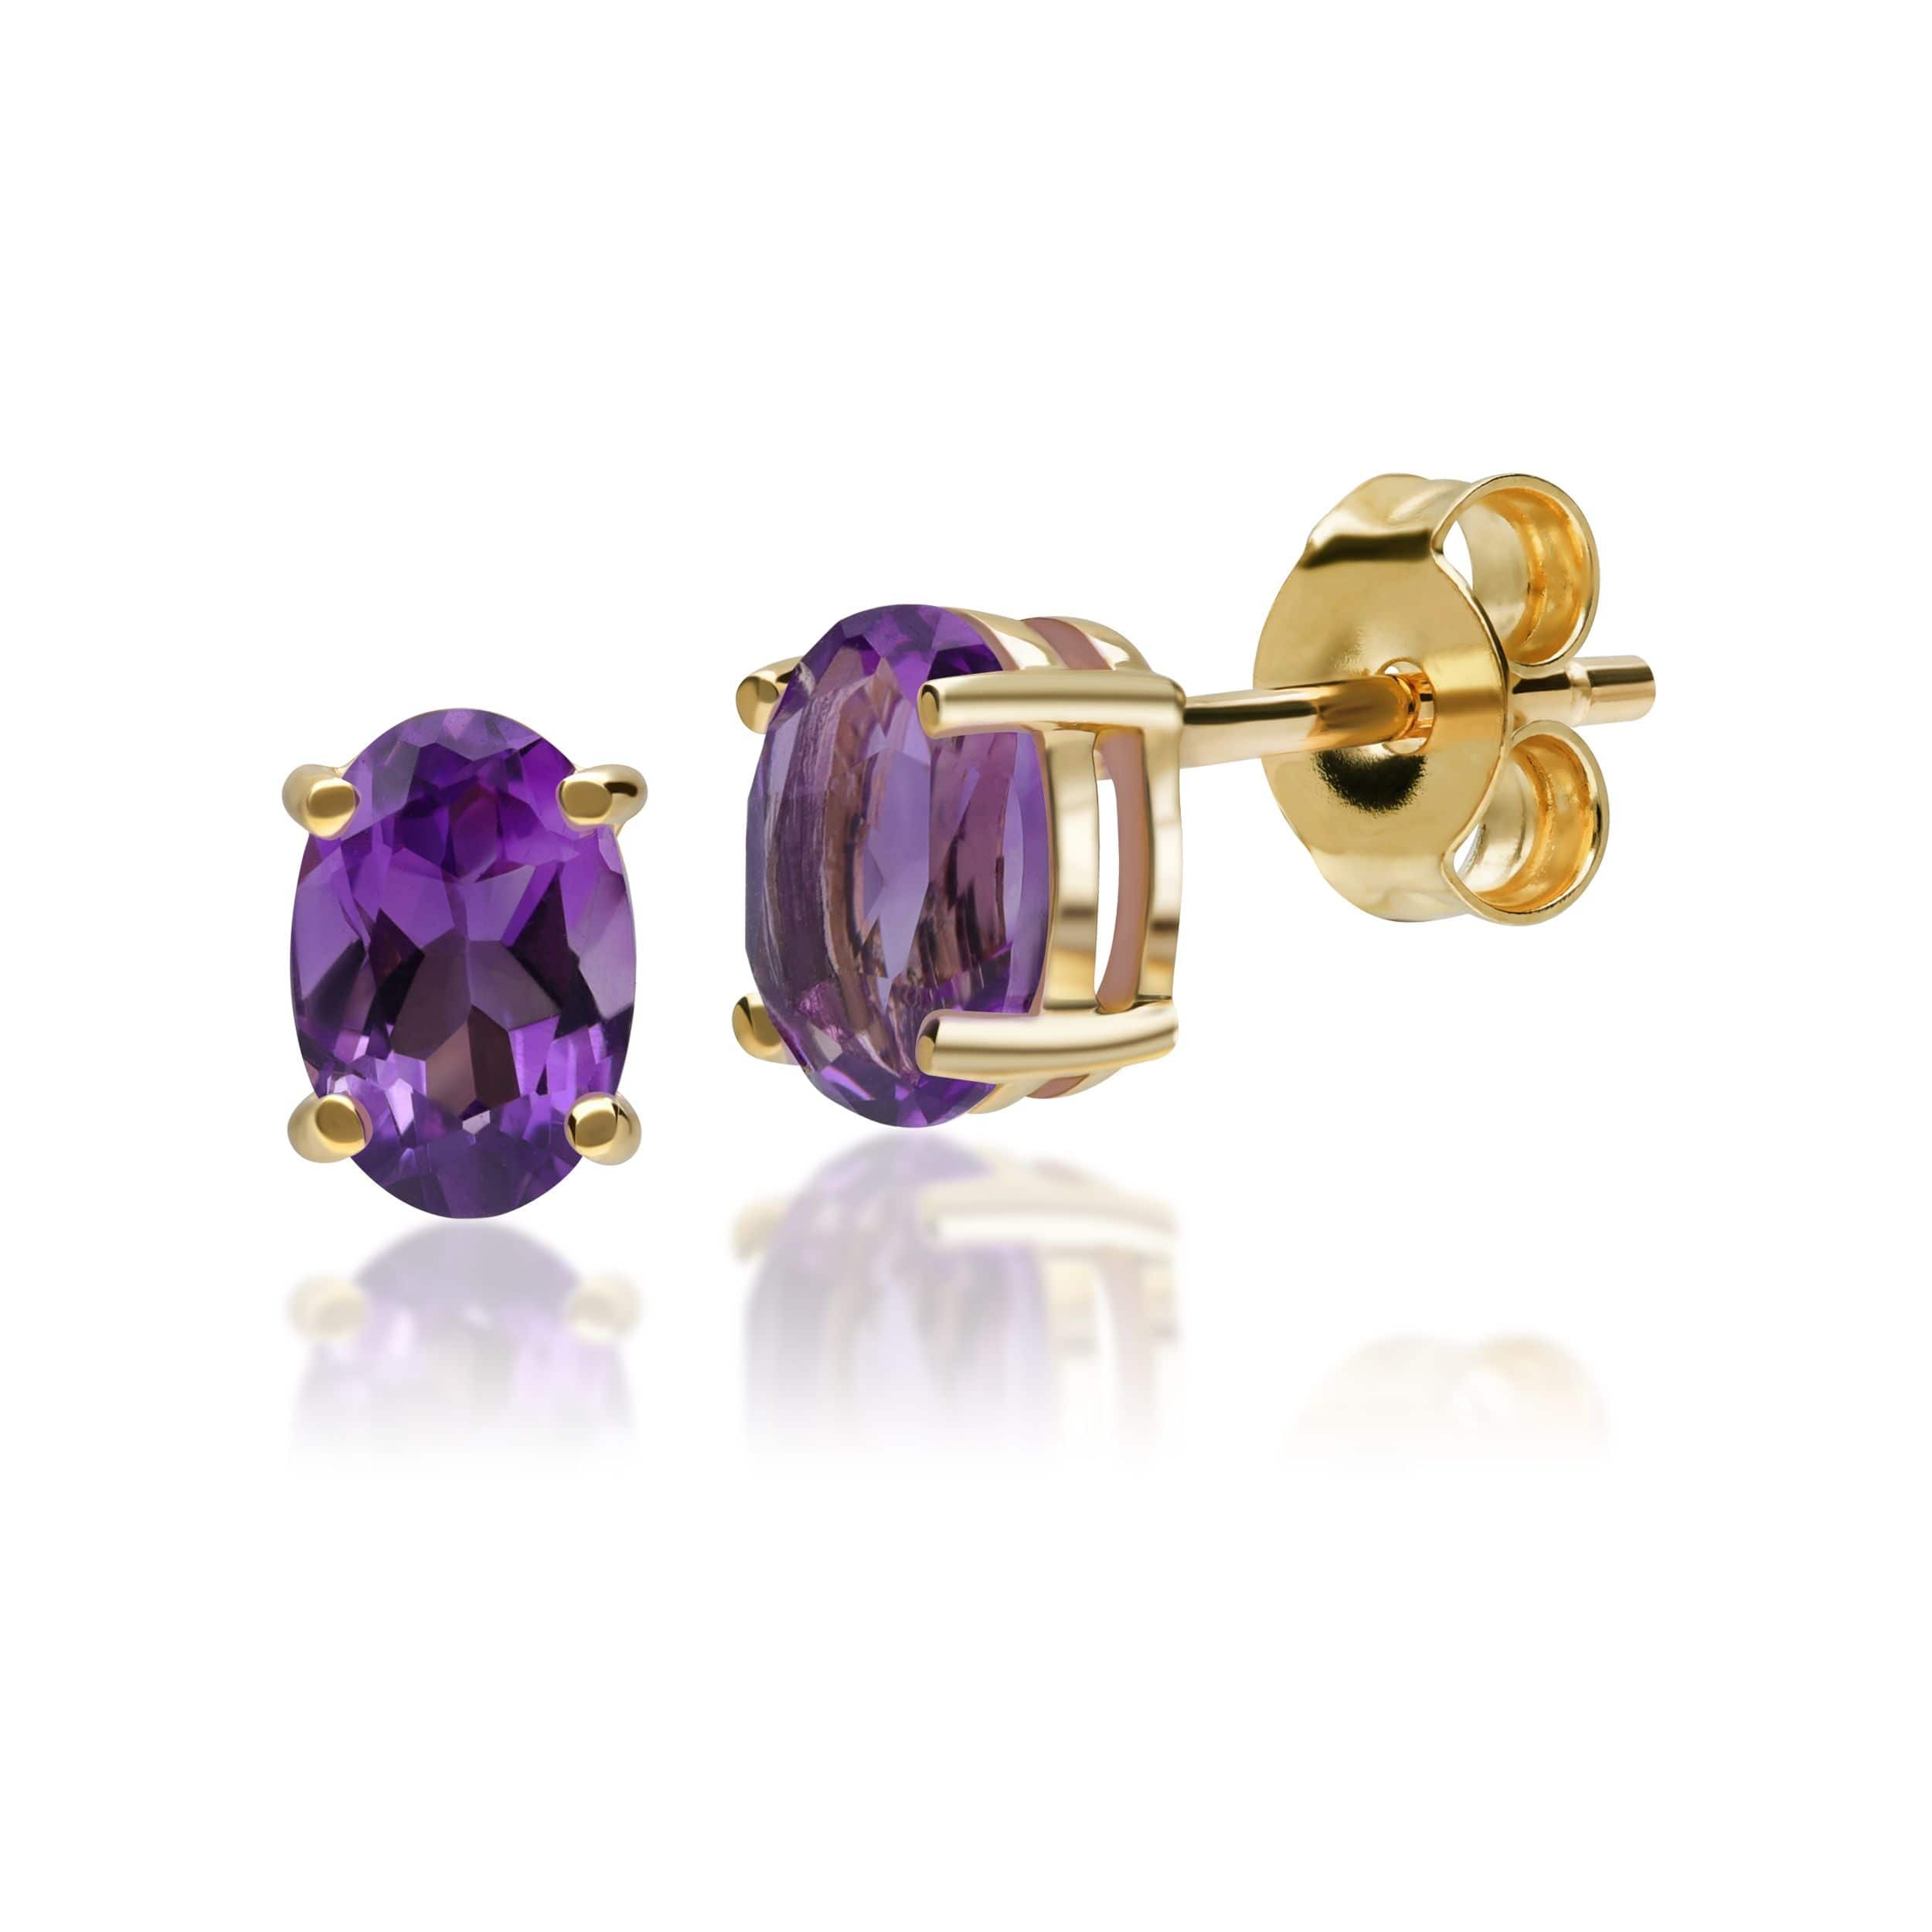 Classic Oval Amethyst Stud Earrings in 9ct Yellow Gold